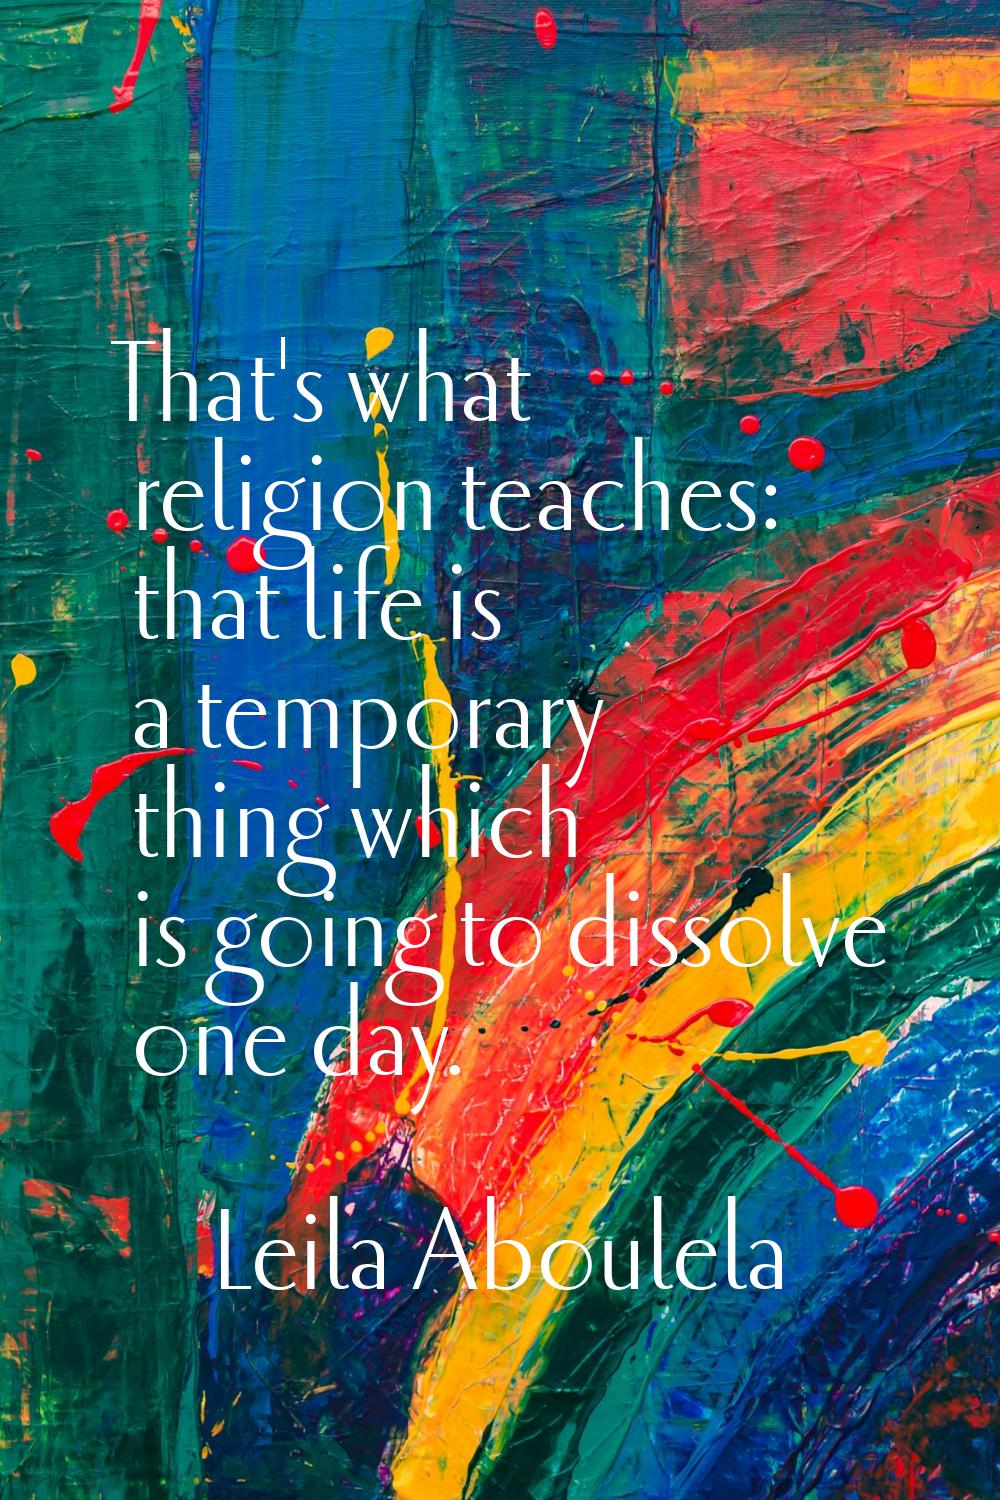 That's what religion teaches: that life is a temporary thing which is going to dissolve one day.